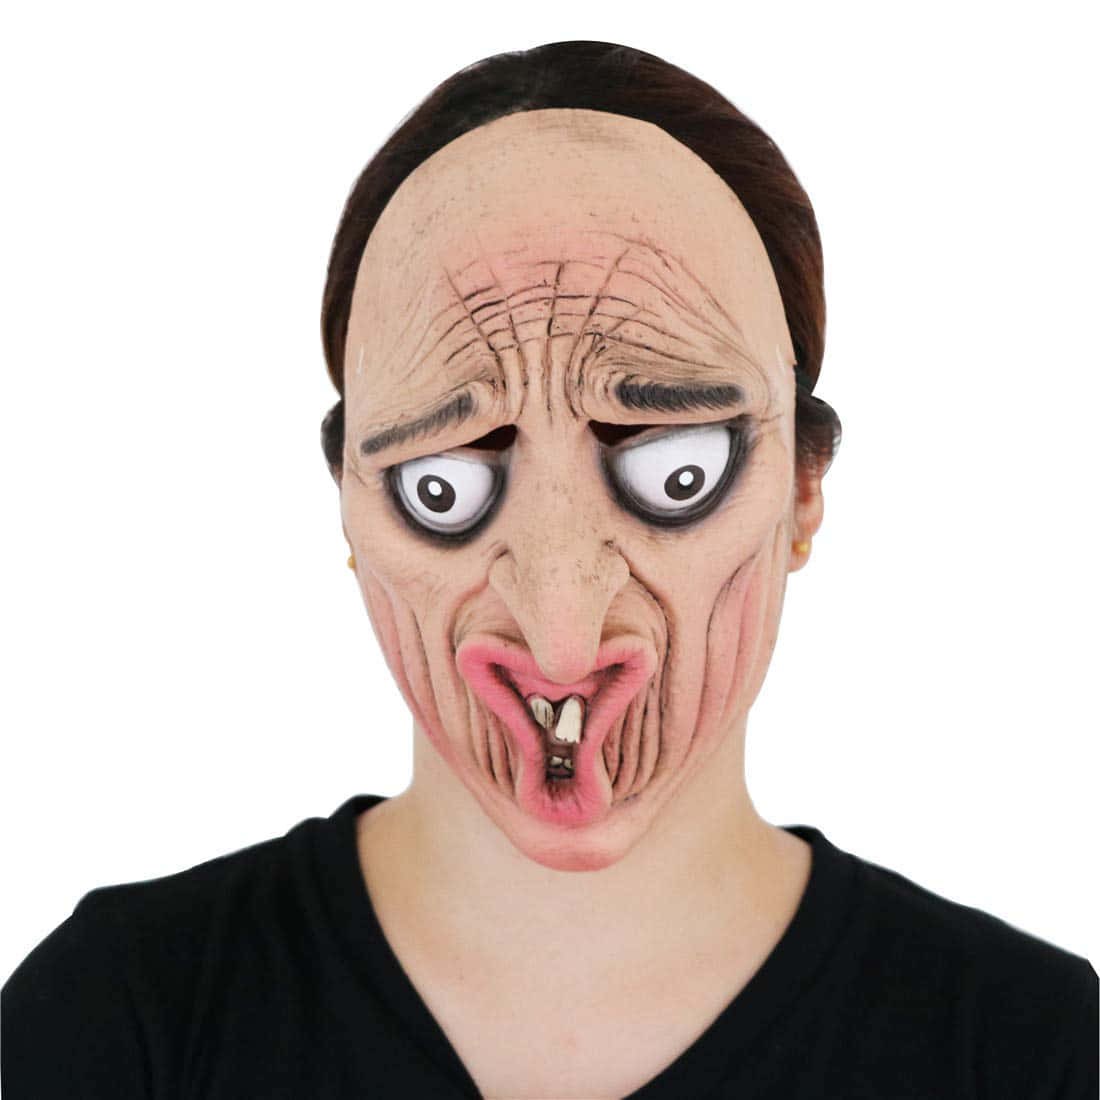 Funny Creepy Mask Facebook Profile Picture